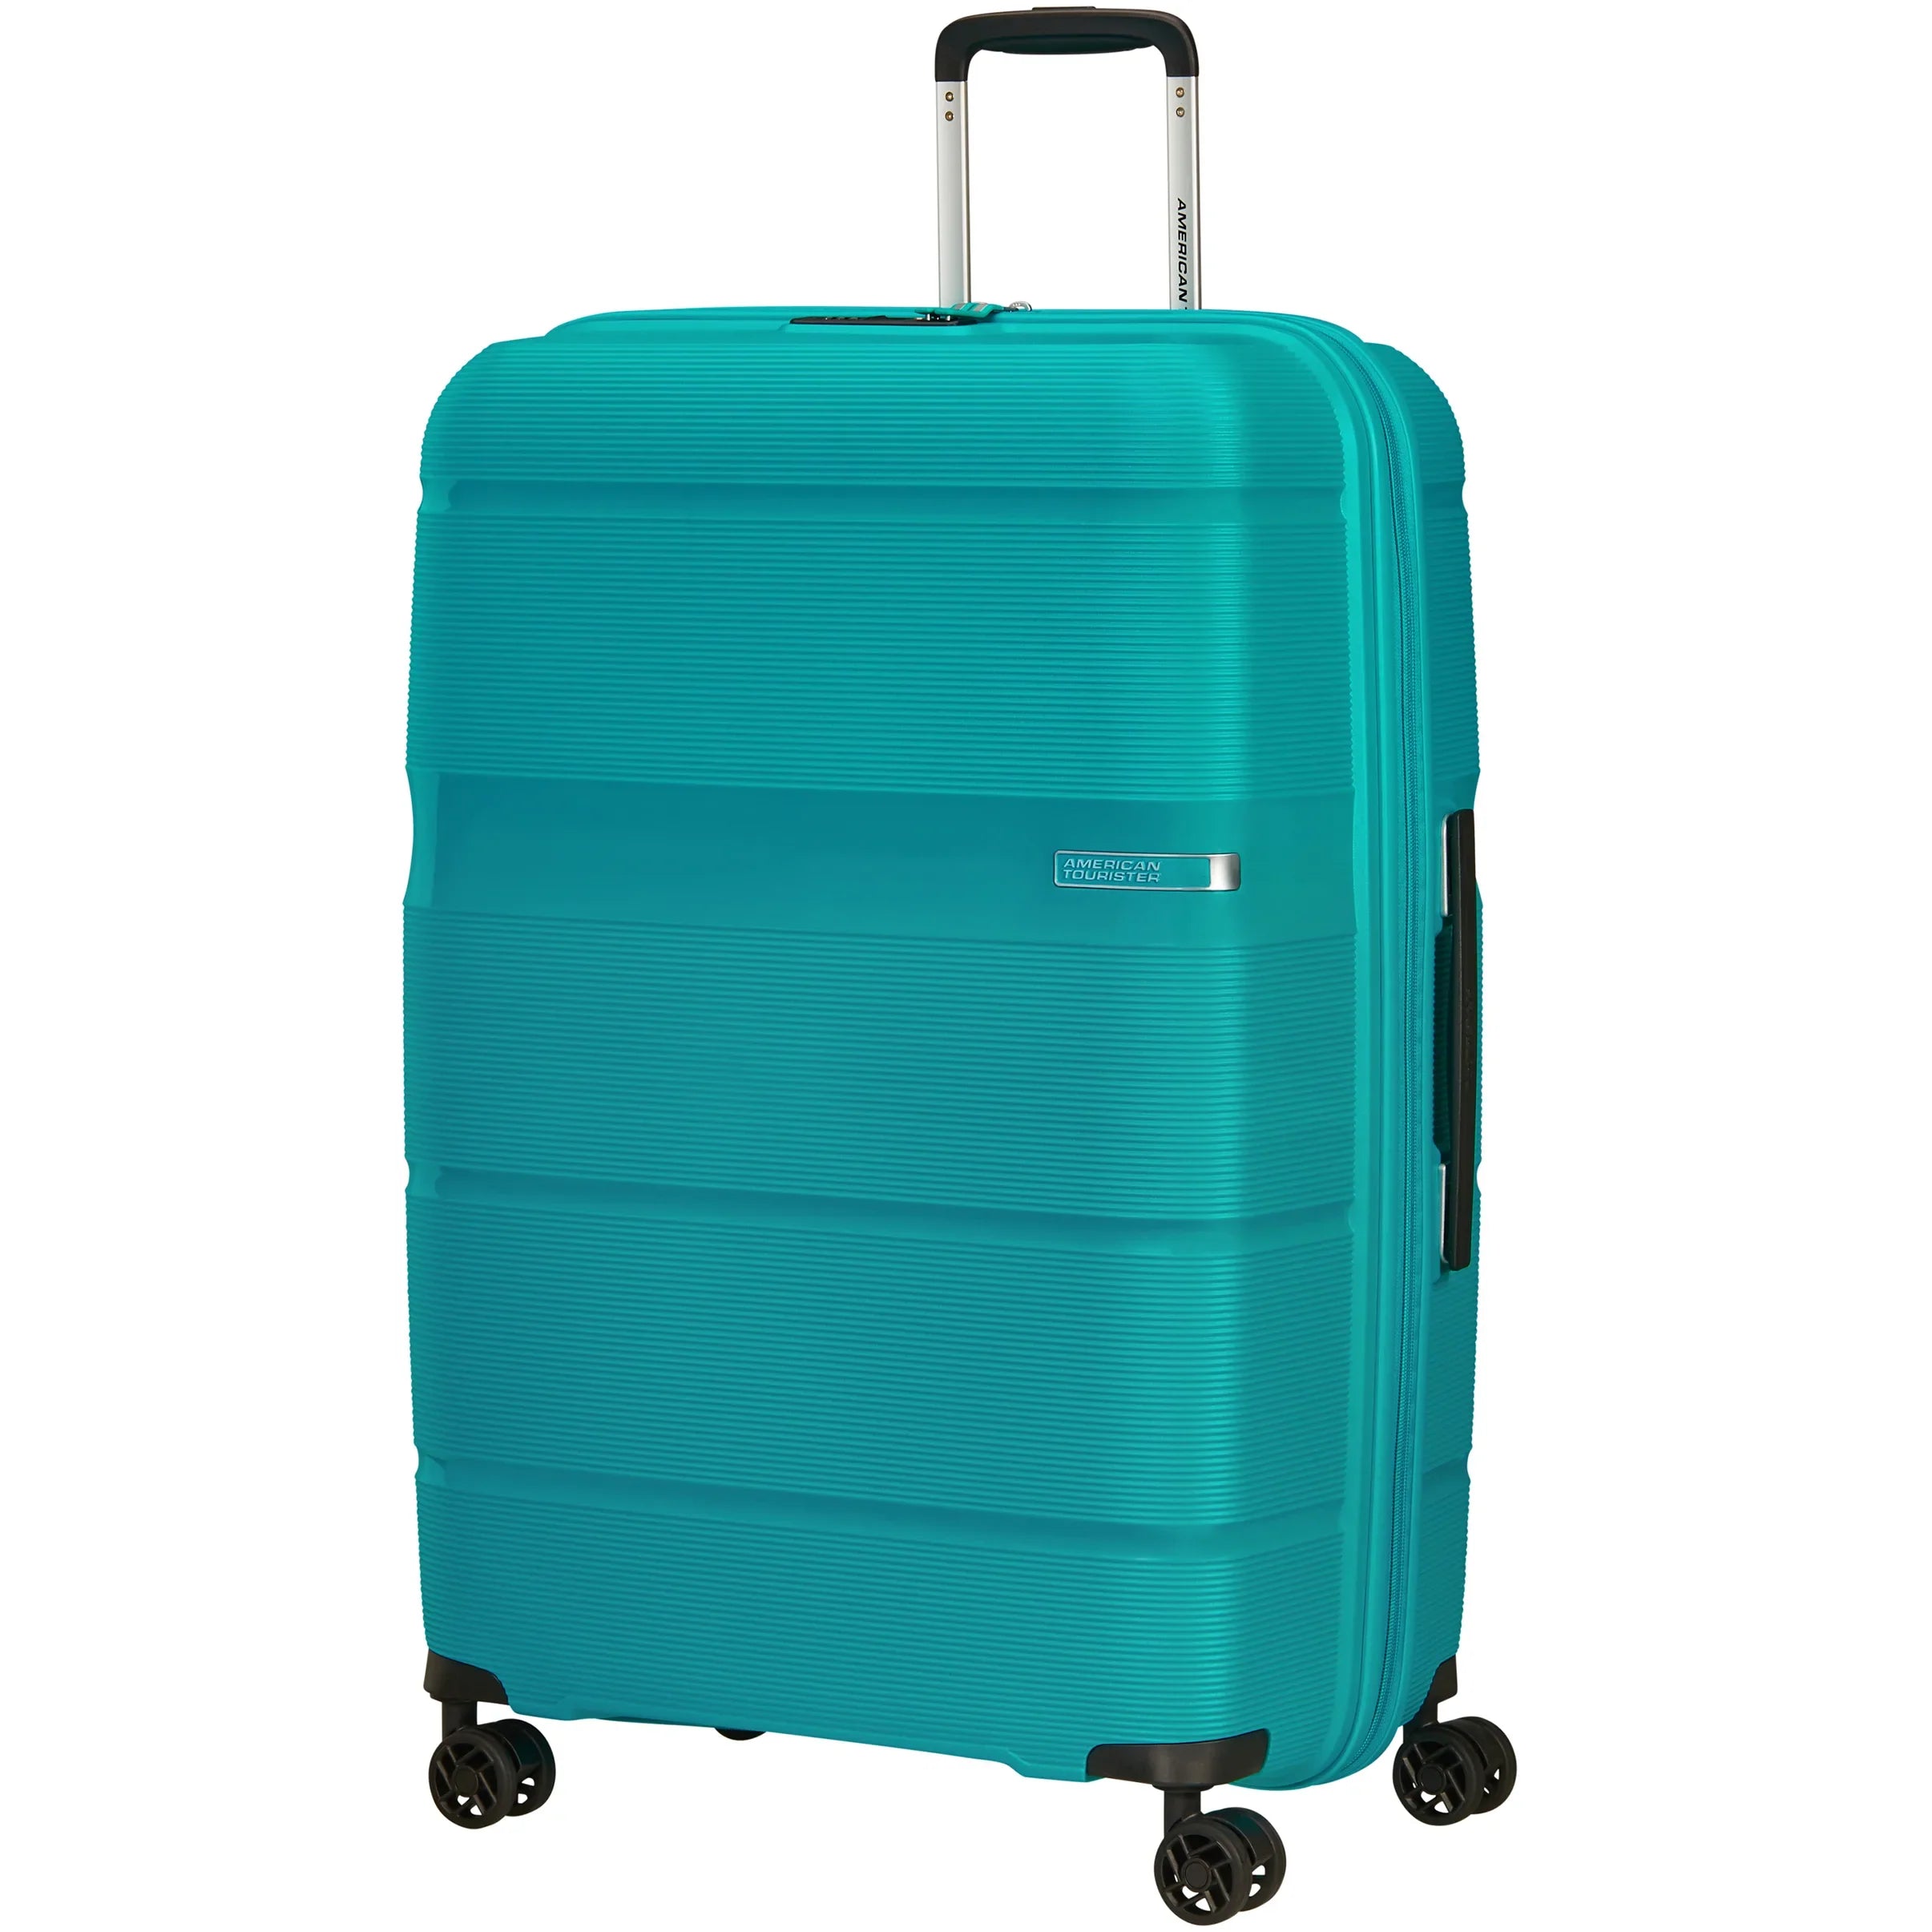 American Tourister Koffer & Trolleys Seite – 5